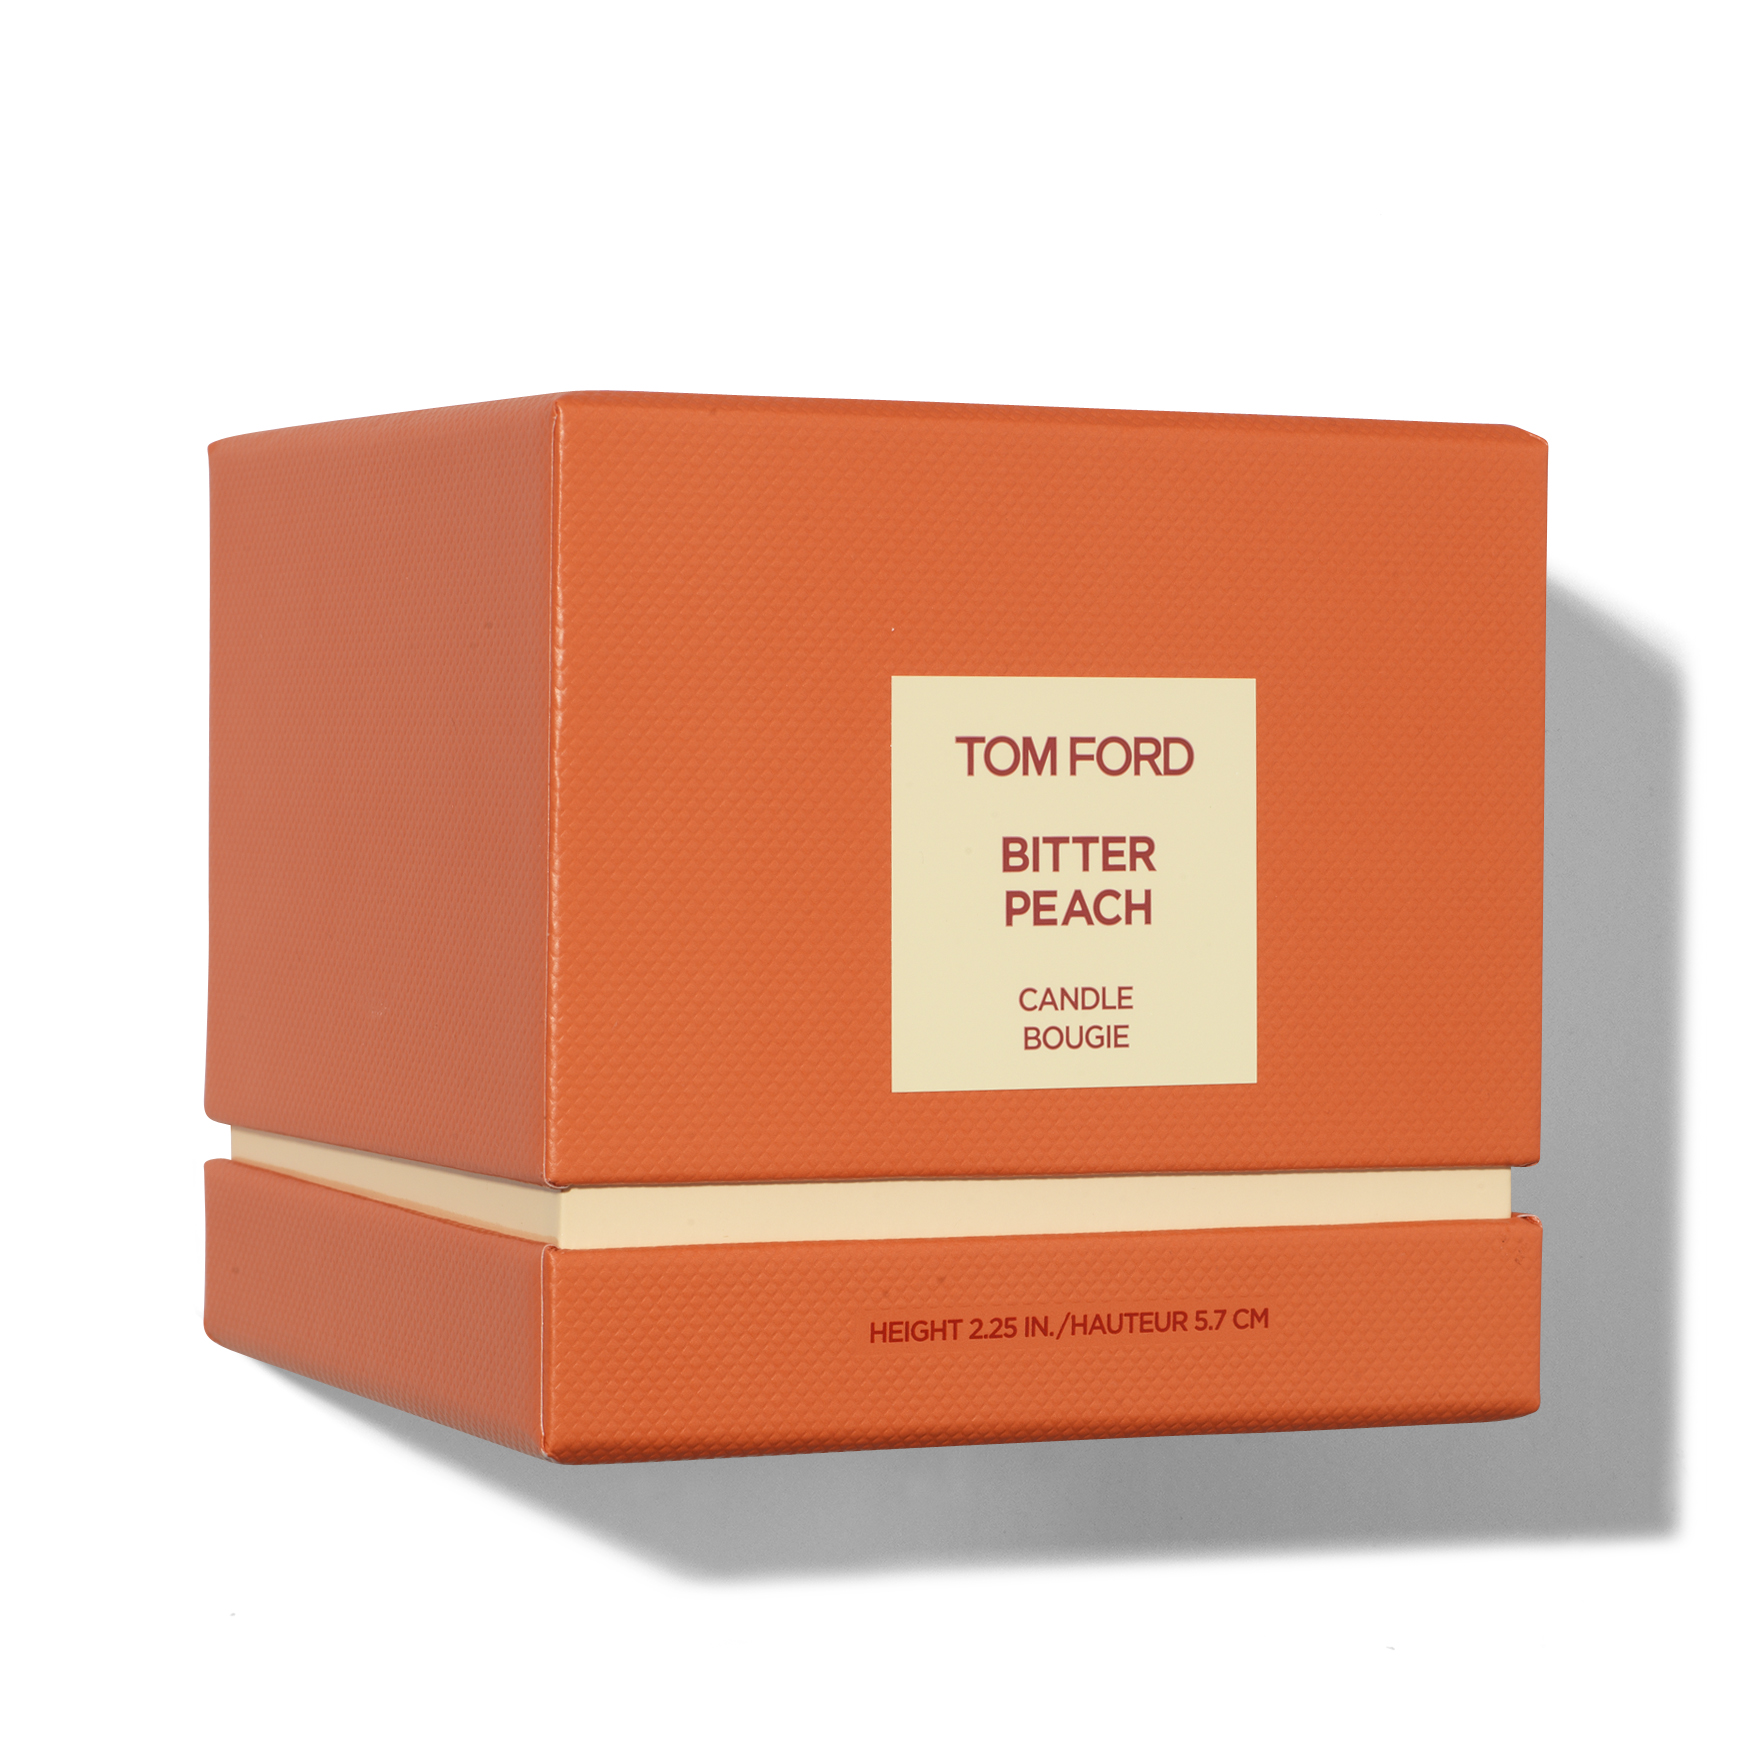 Tom Ford Bitter Peach Candle | Space NK